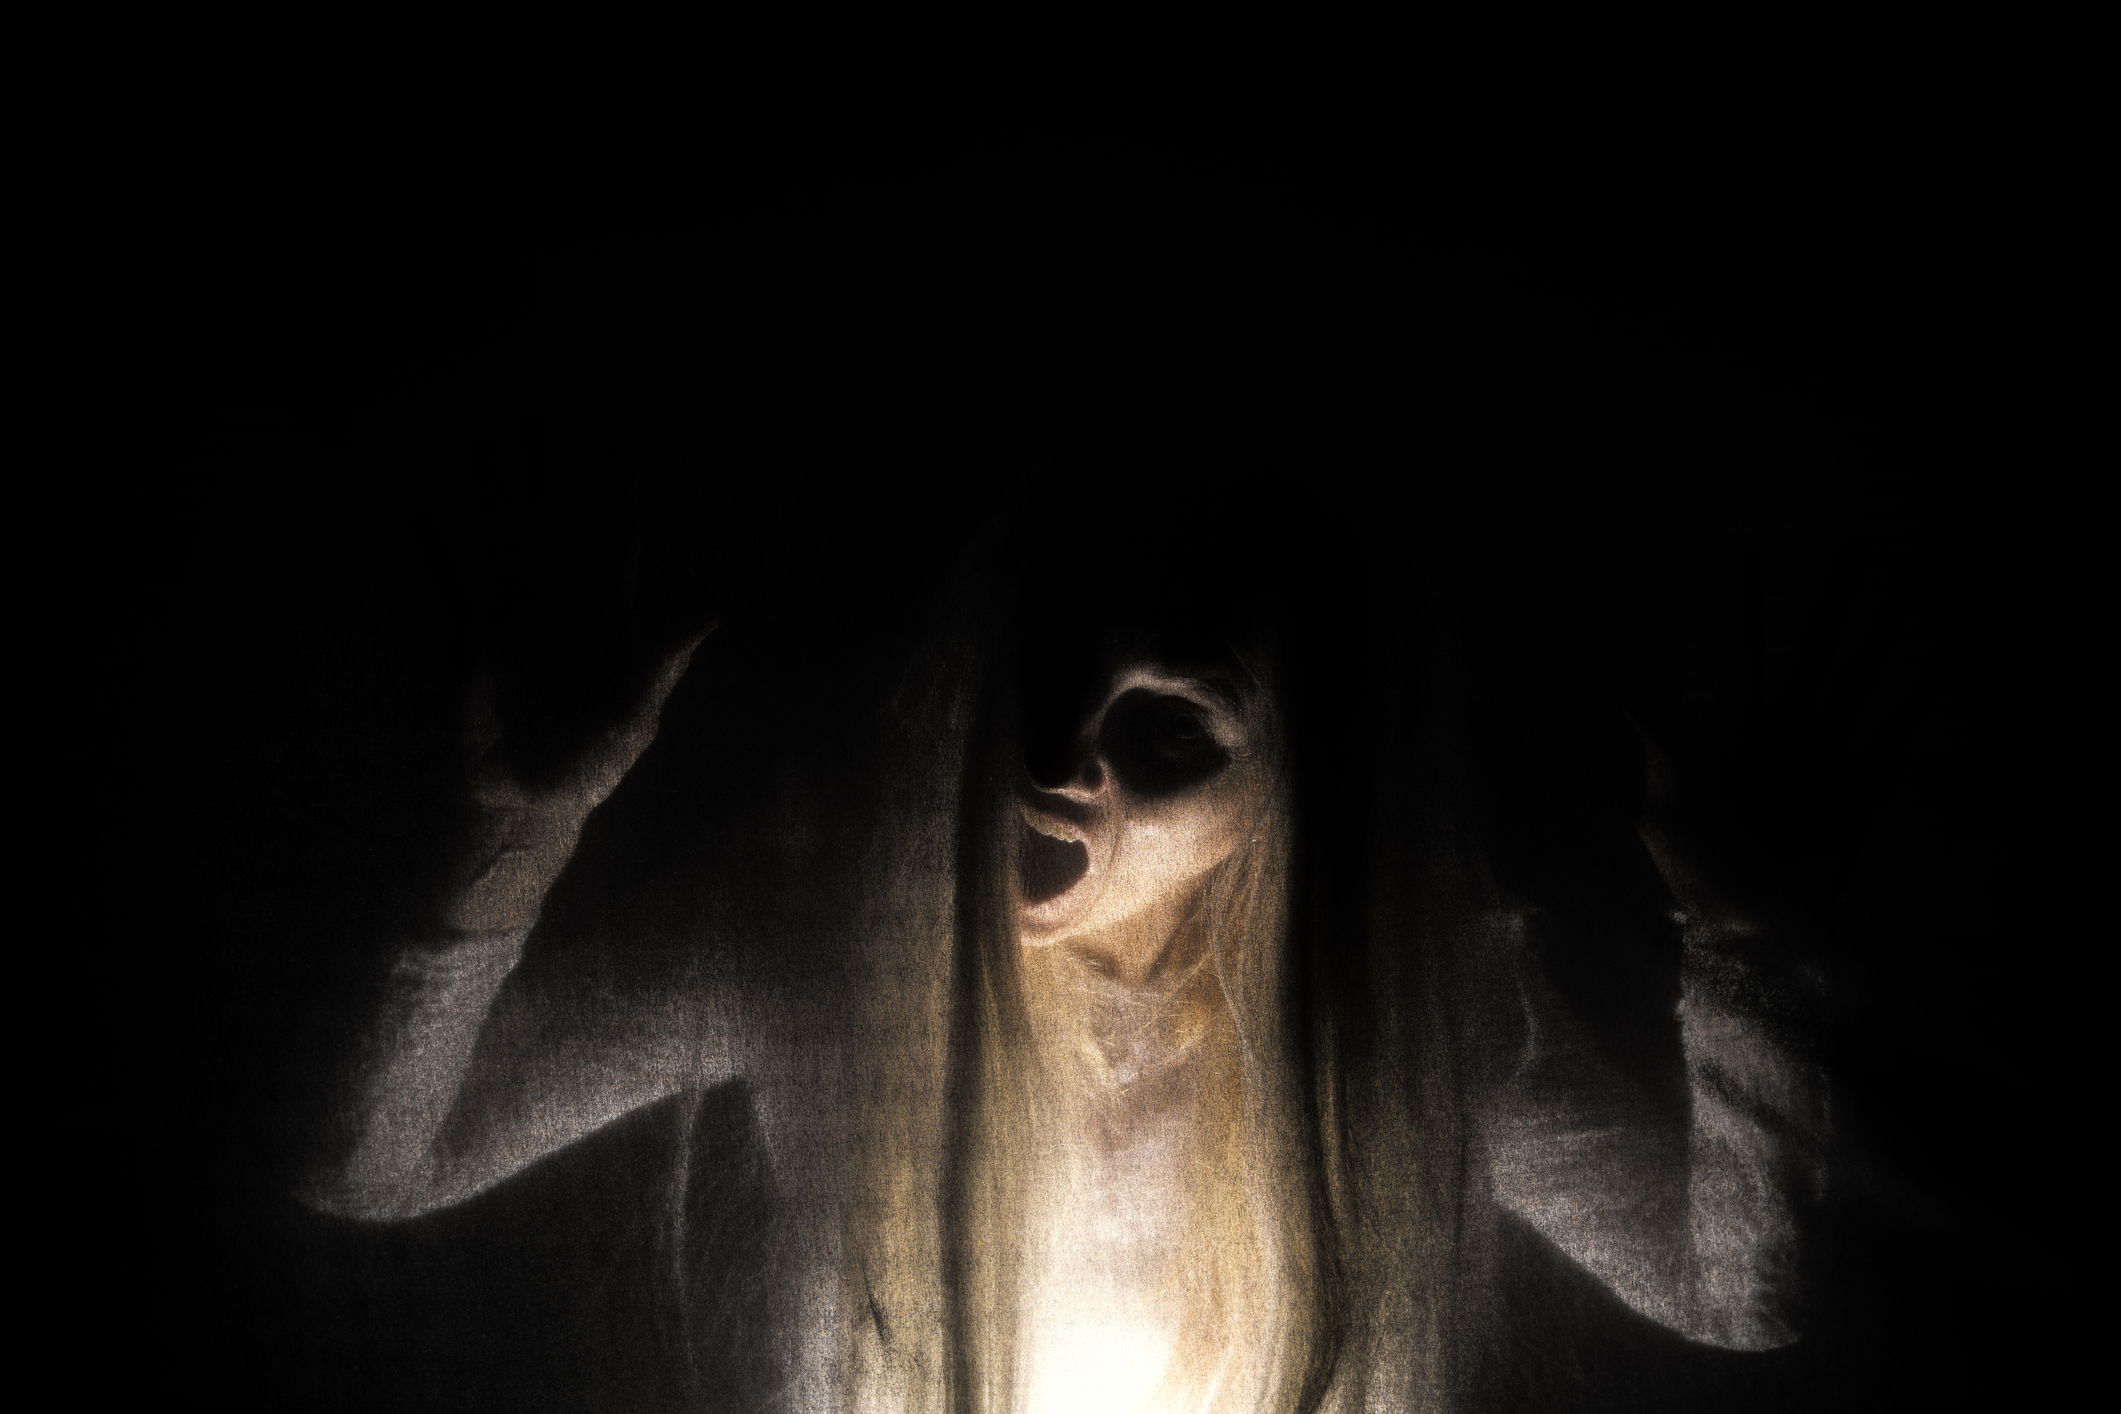 A ghostly figure with long hair in the dark and illuminated by a light